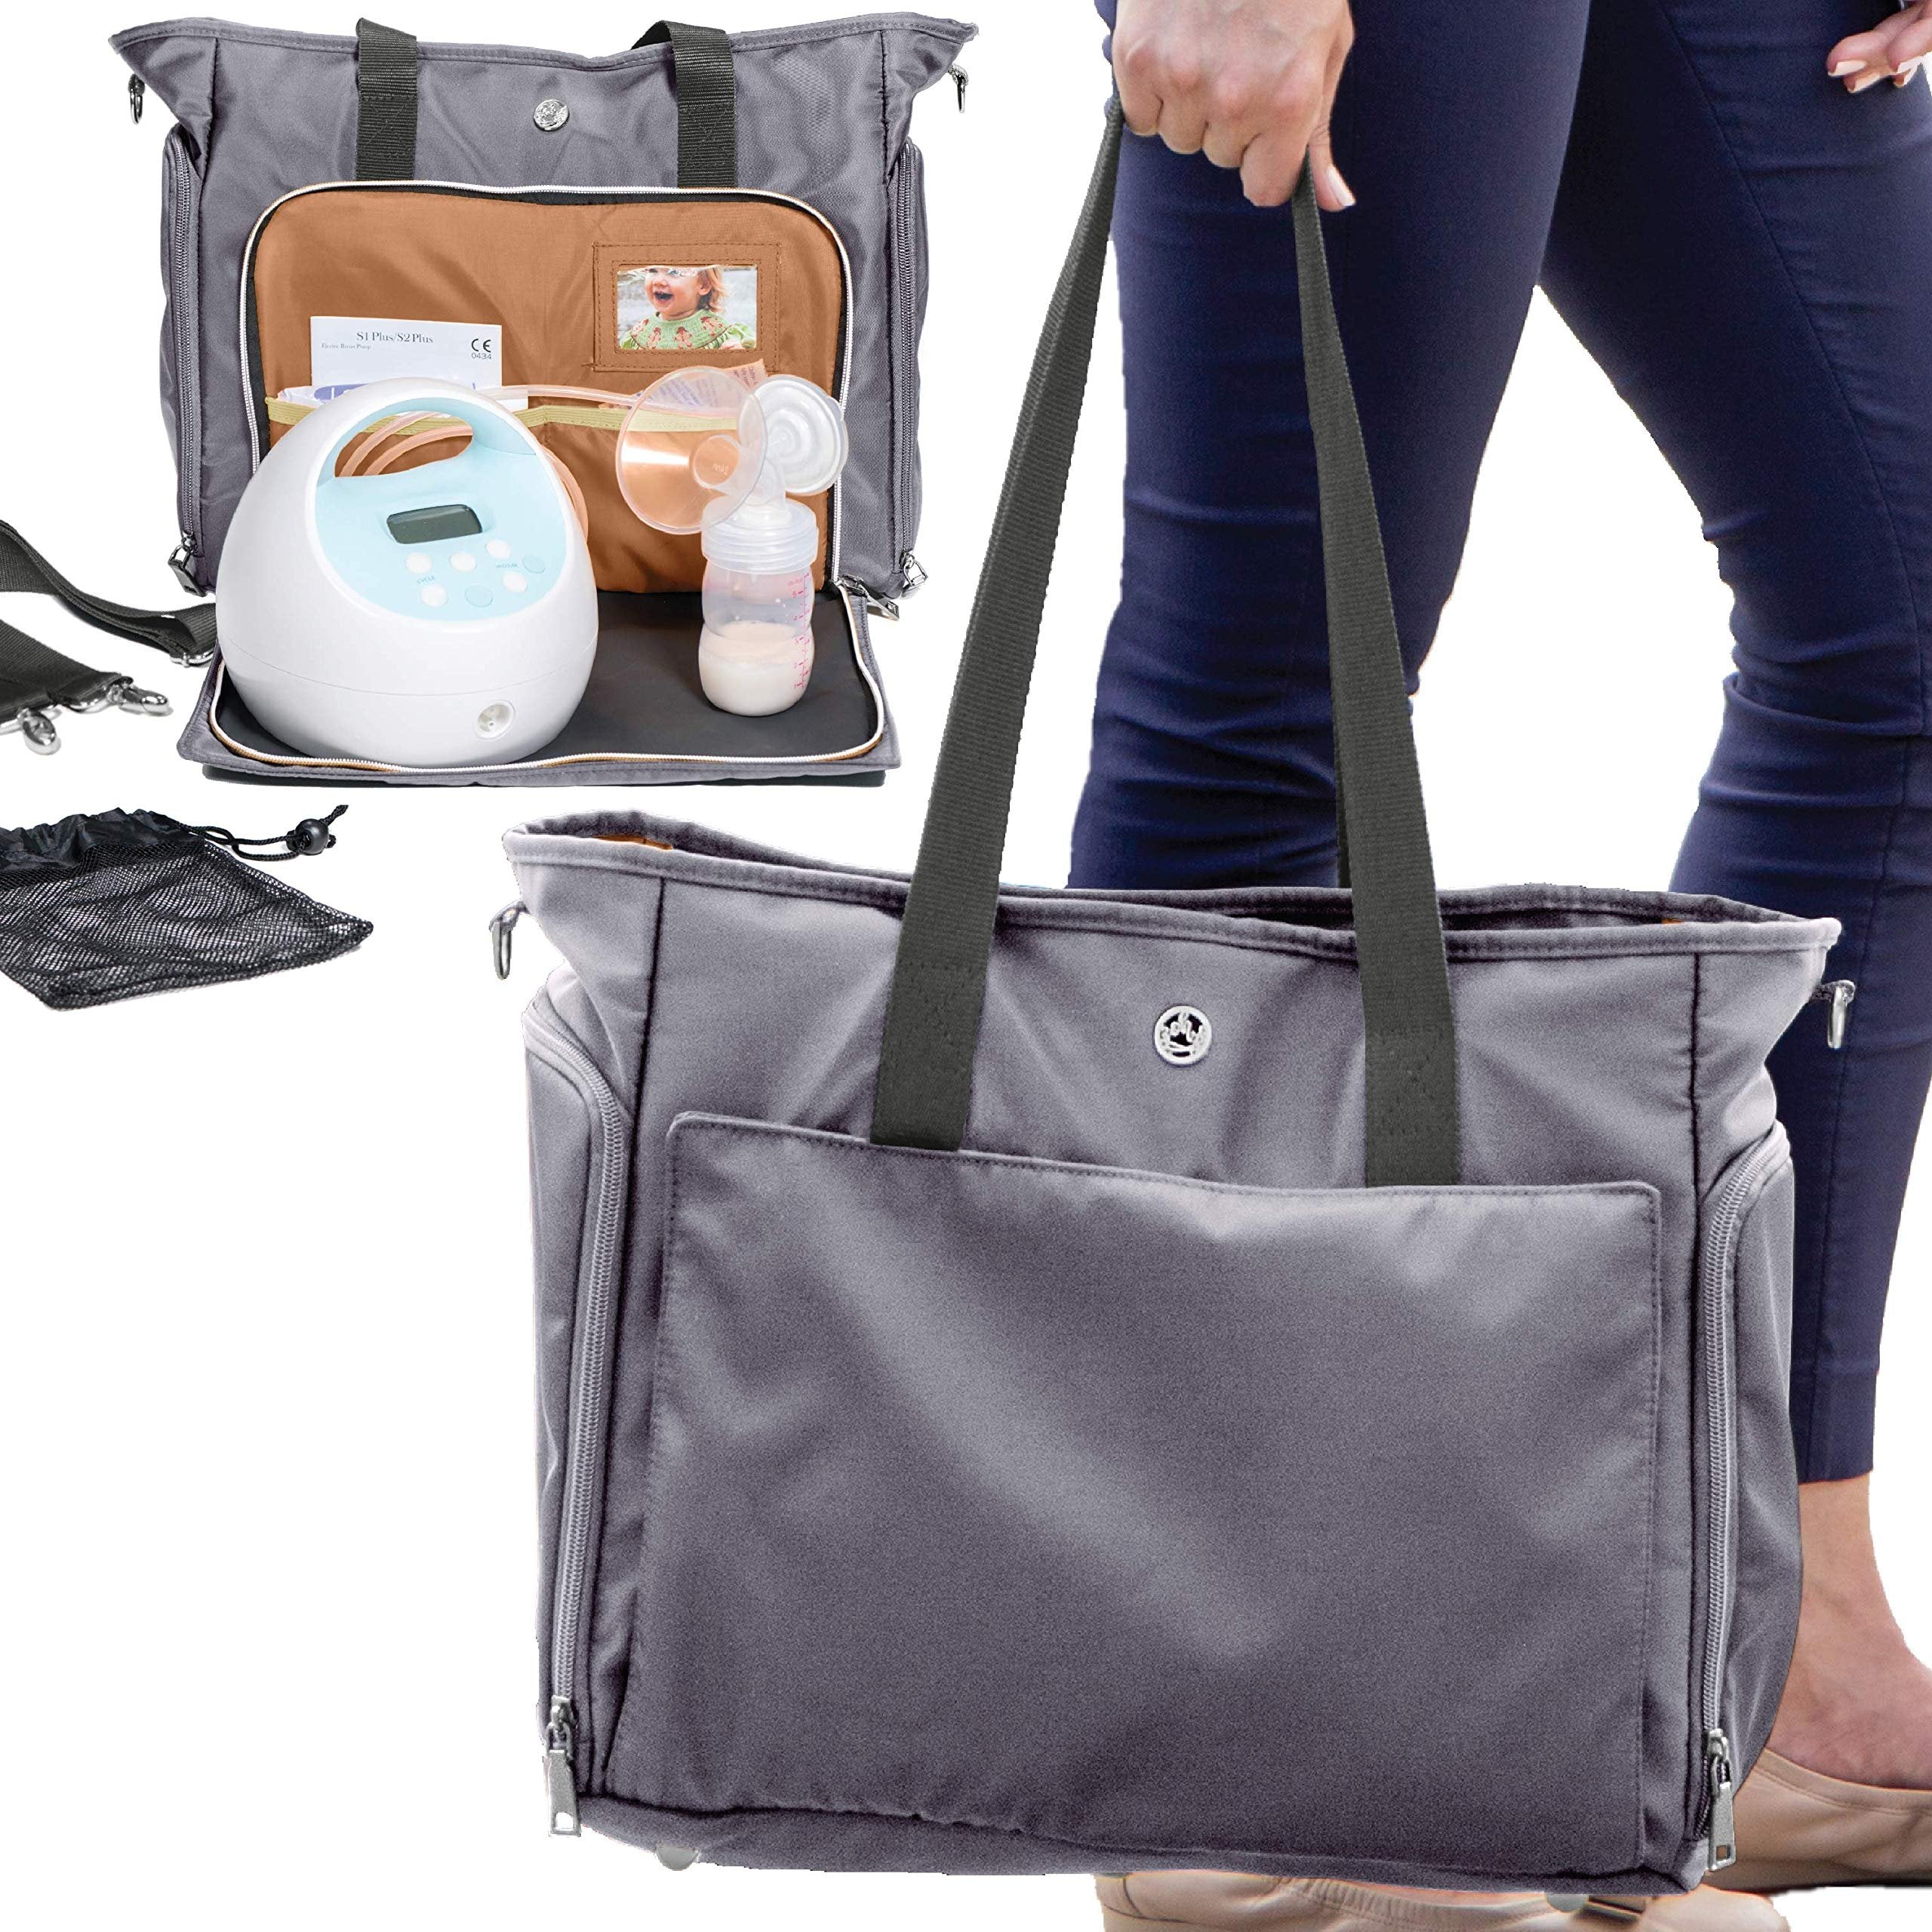 Zohzo Lauren Breast Pump Bag - Portable Tote Bag Great for Travel or Storage - Includes Padded Laptop Sleeve - Fits Most Major Brands Including Medela and Spectra (Pewter)